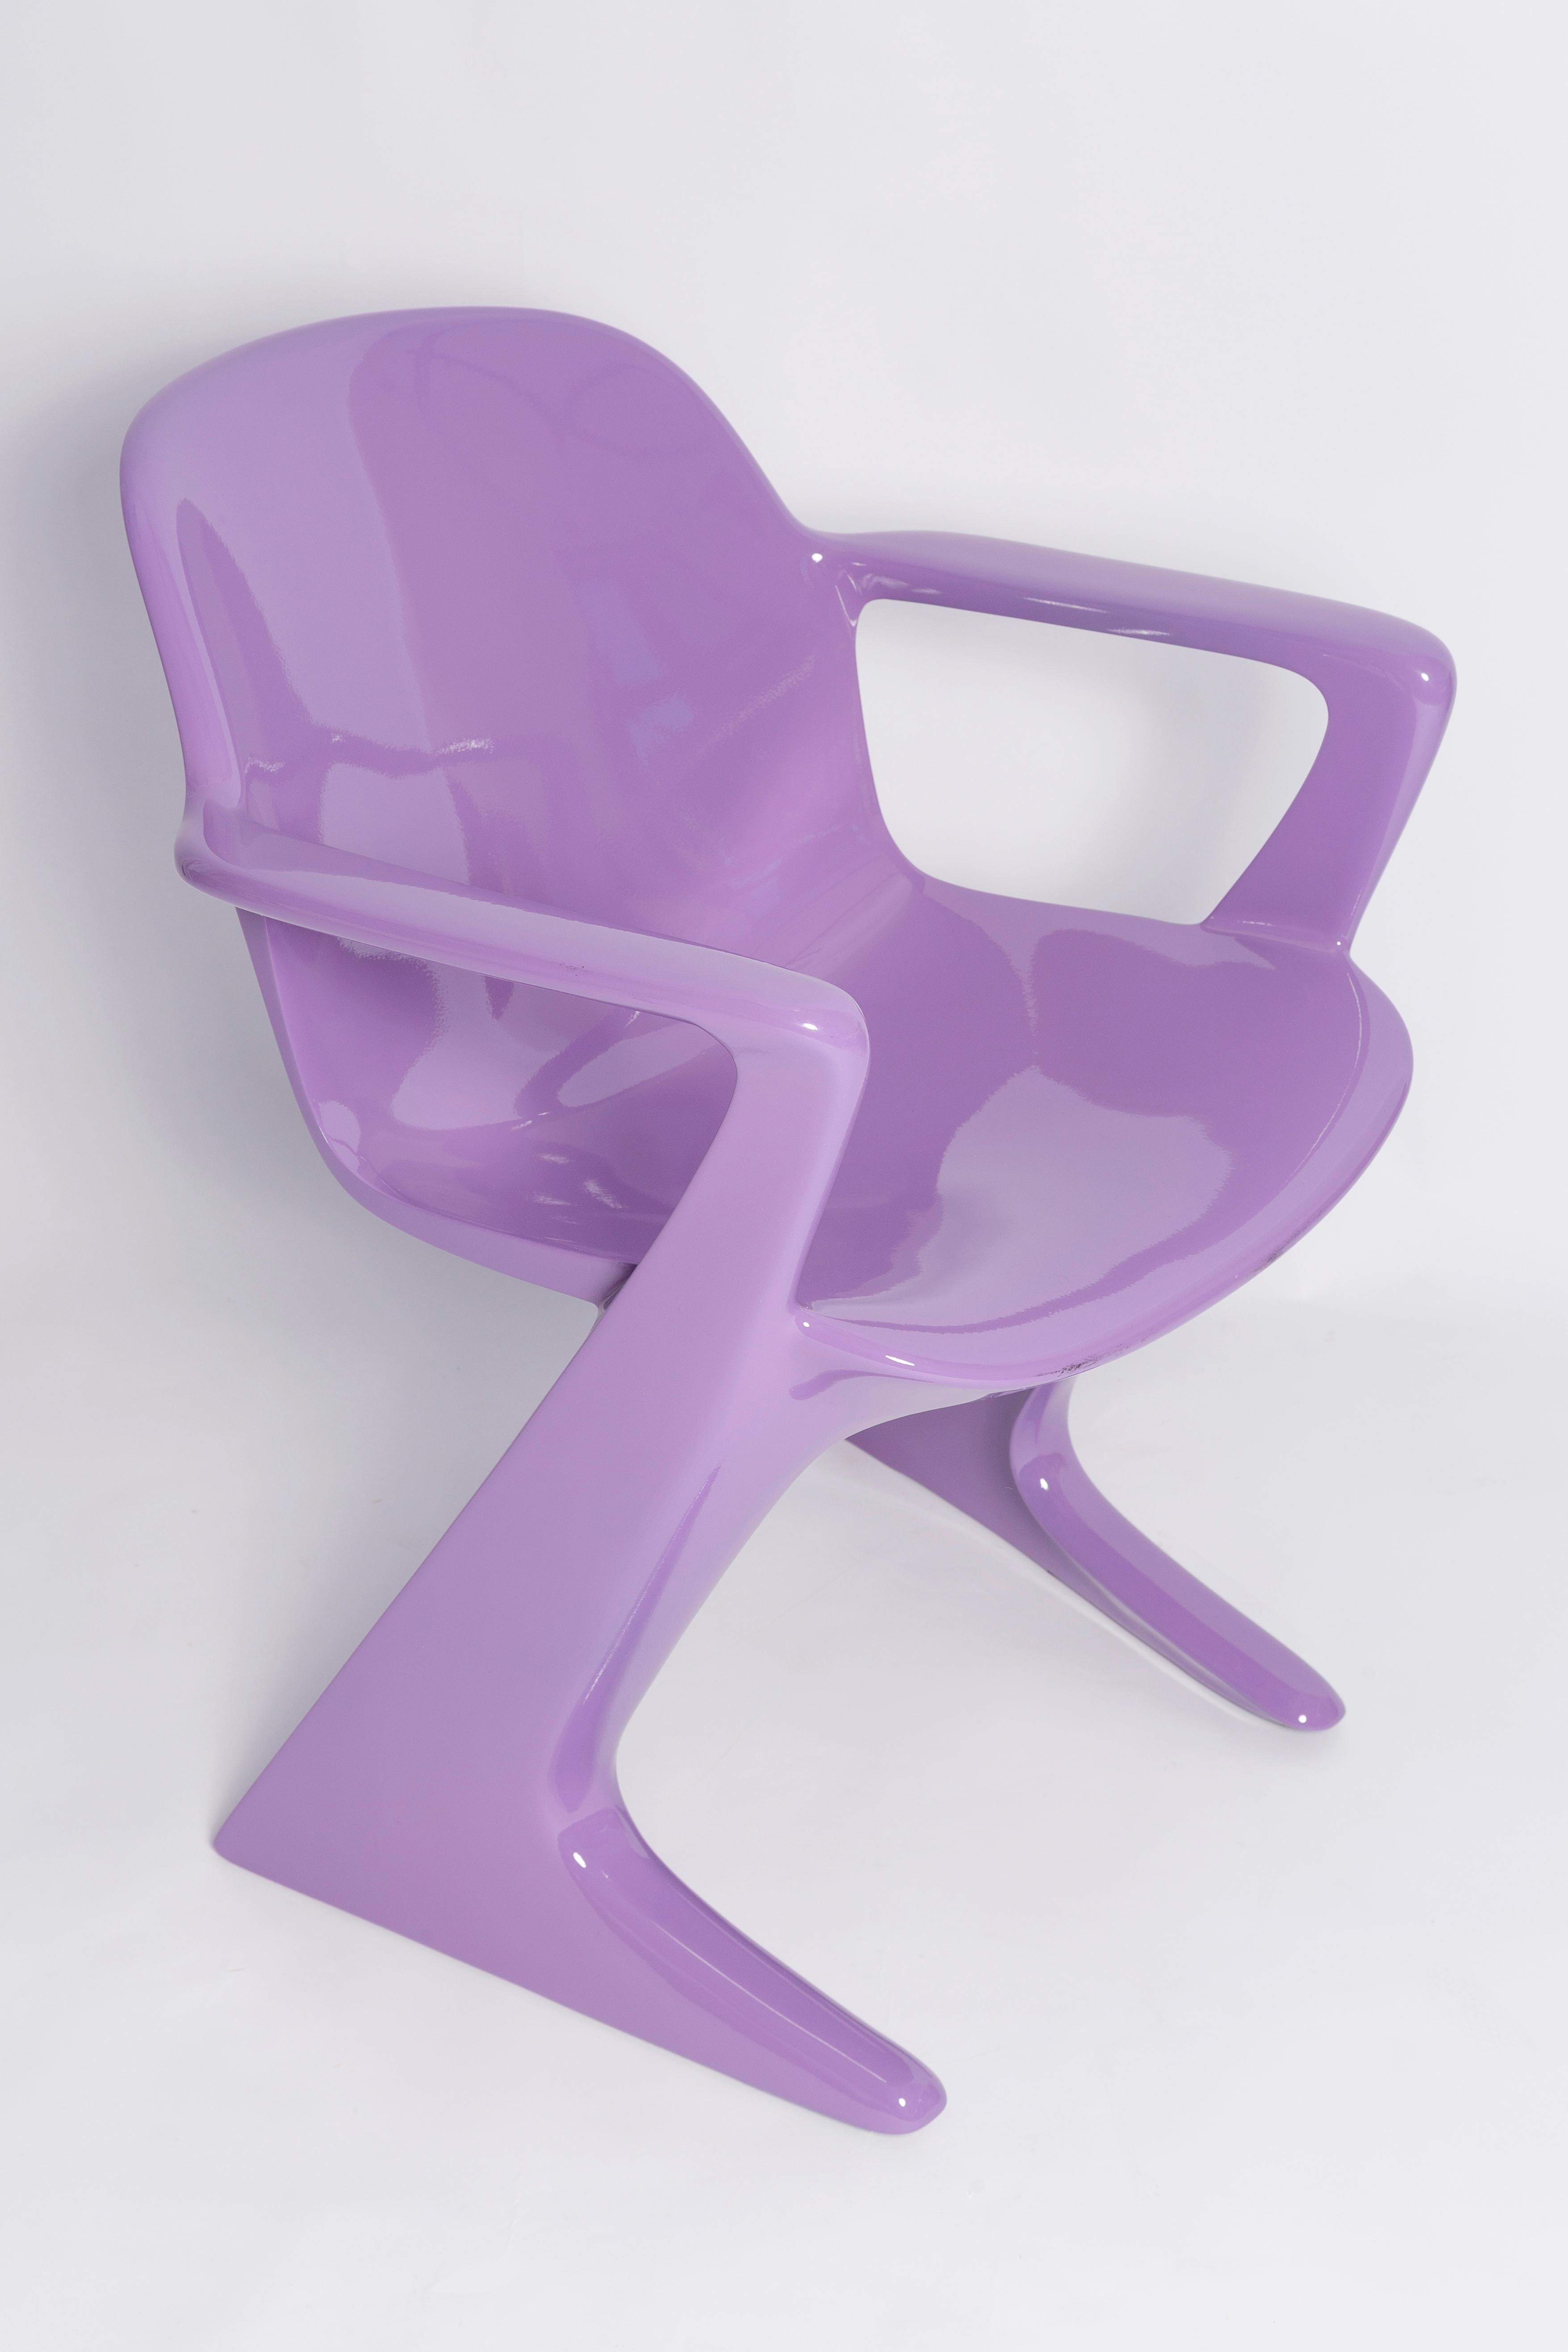 Lacquered Blue Lilac Kangaroo Chair Designed by Ernst Moeckl, Germany, 1968 For Sale